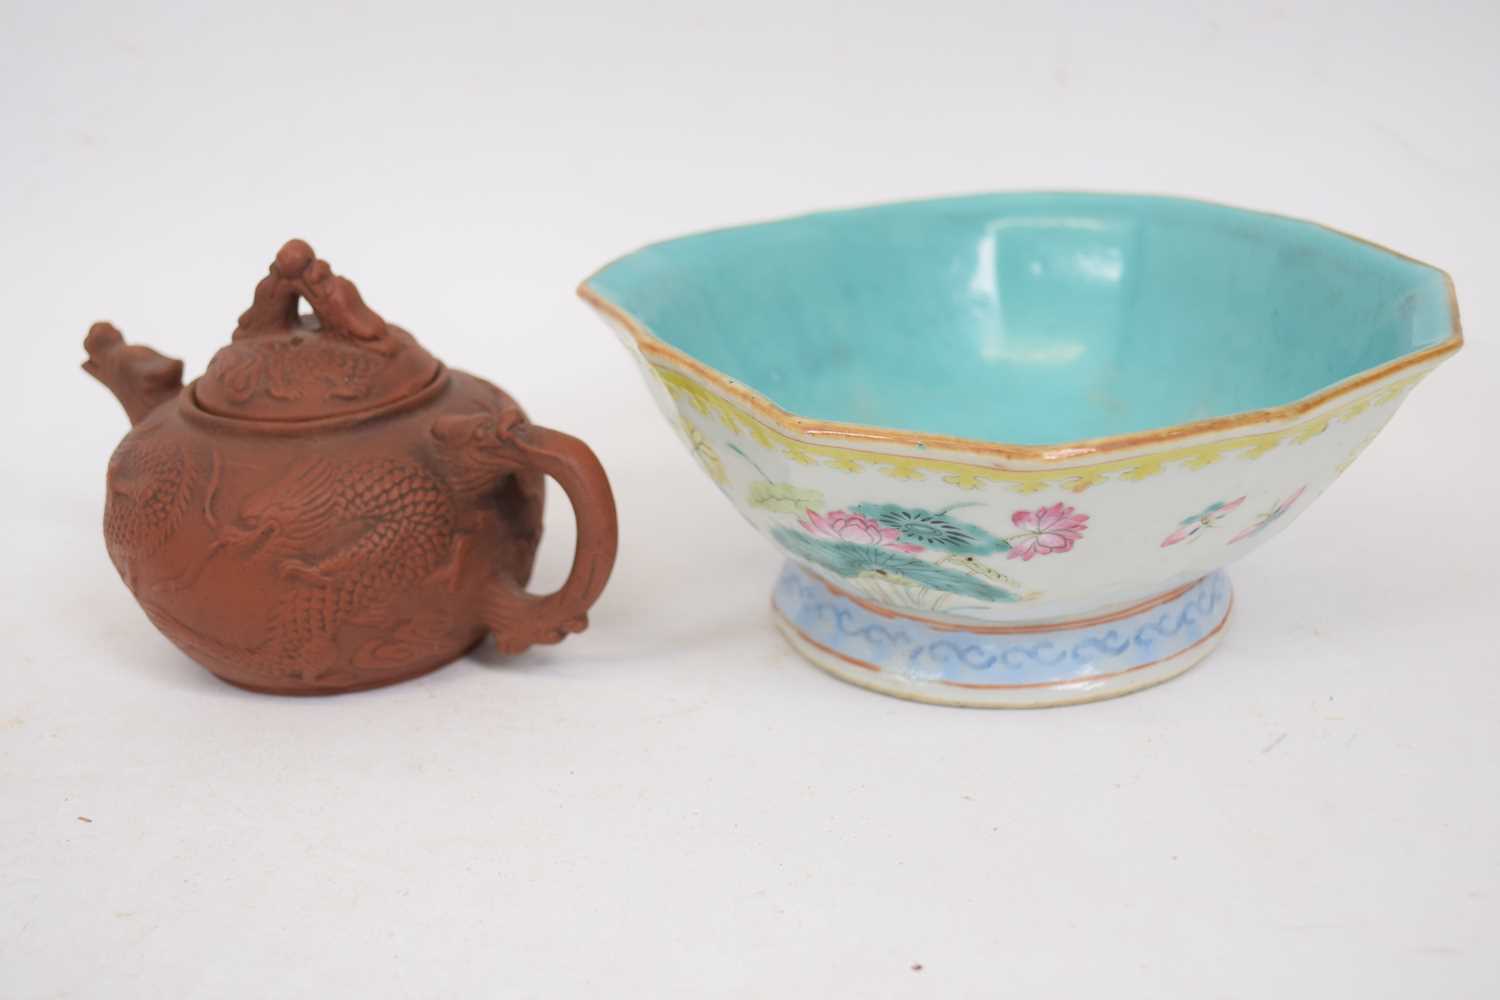 Yixing type tea pot together with a shaped Chinese porcelain bowl with a polychrome design of